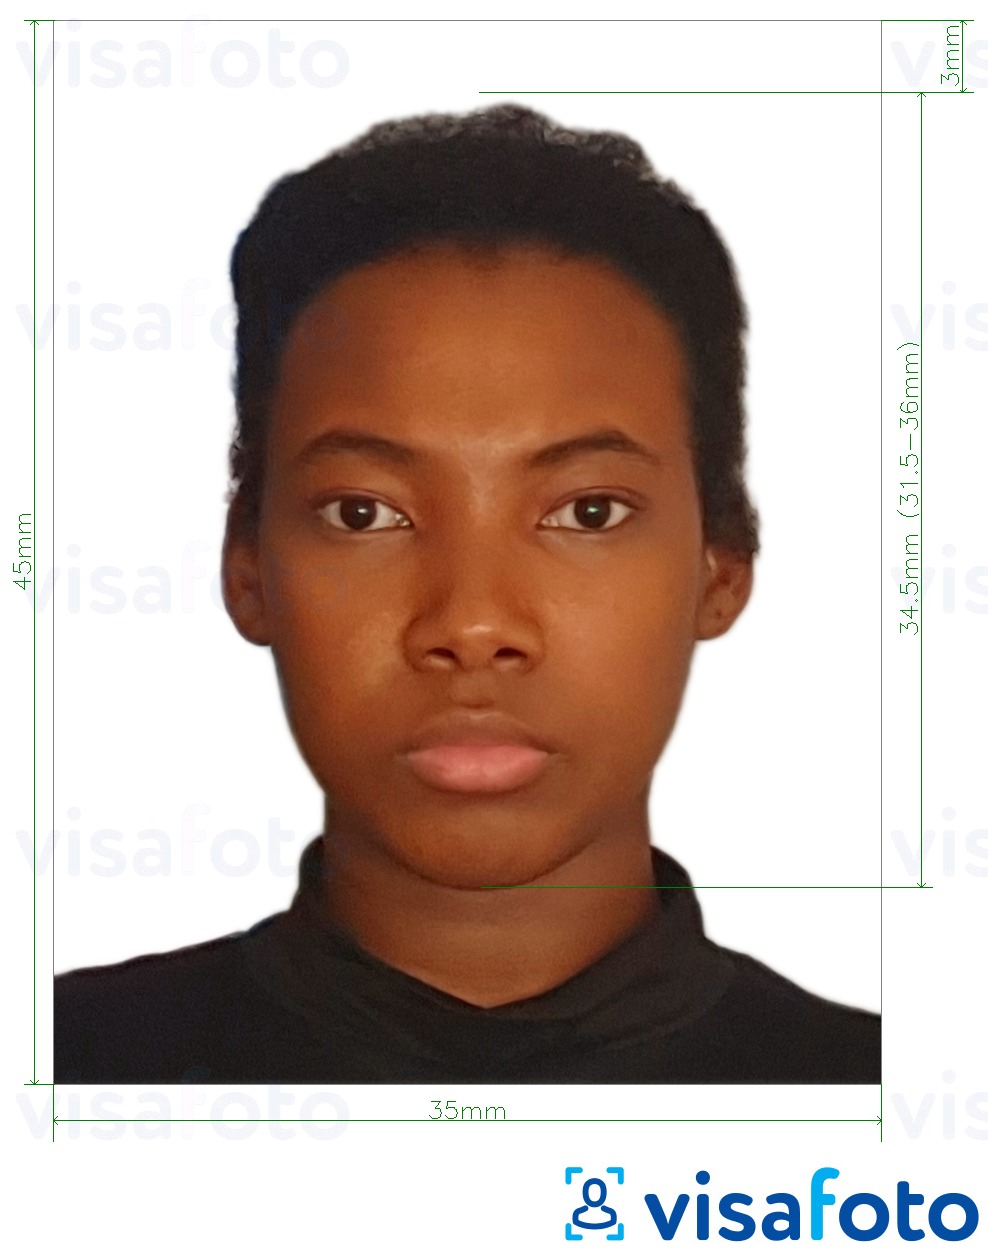 Example of photo for Namibia visa from Europe 35x45mm (3.5x4.5 cm) with exact size specification